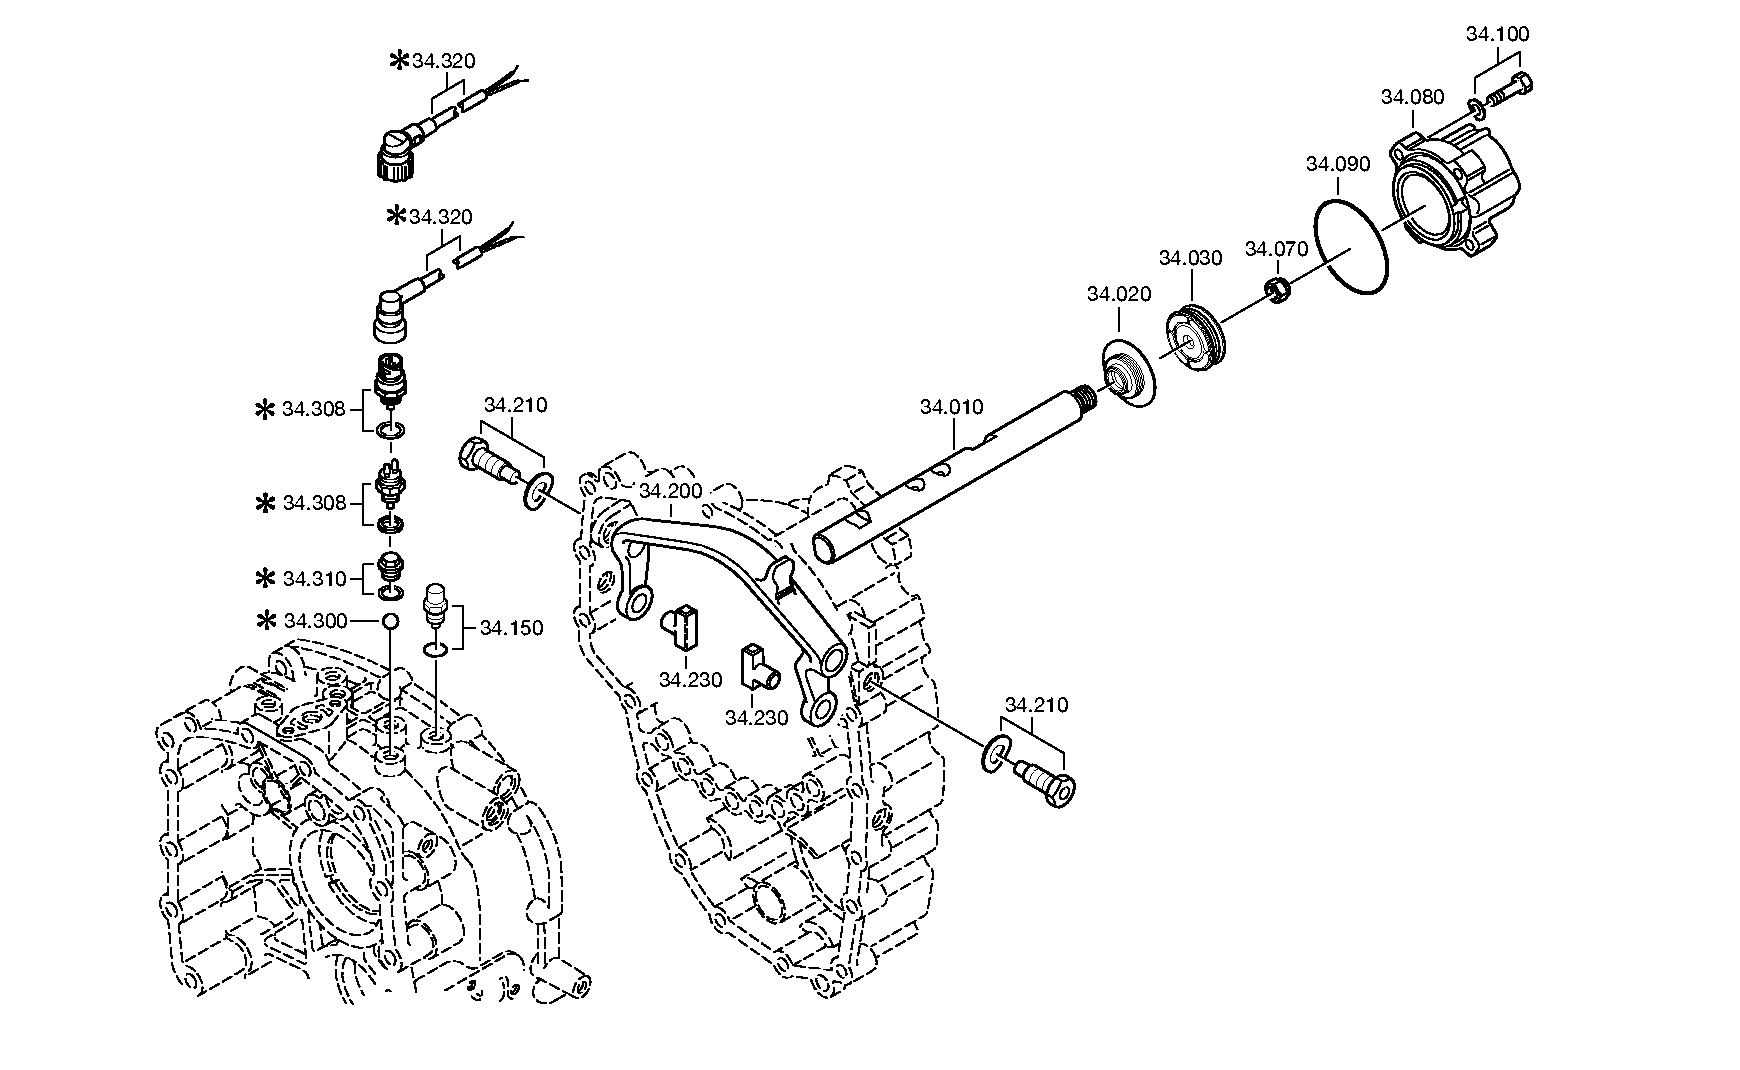 drawing for ASIA MOTORS CO. INC. 409-01-0057 - DETENT PLUNGER (figure 5)